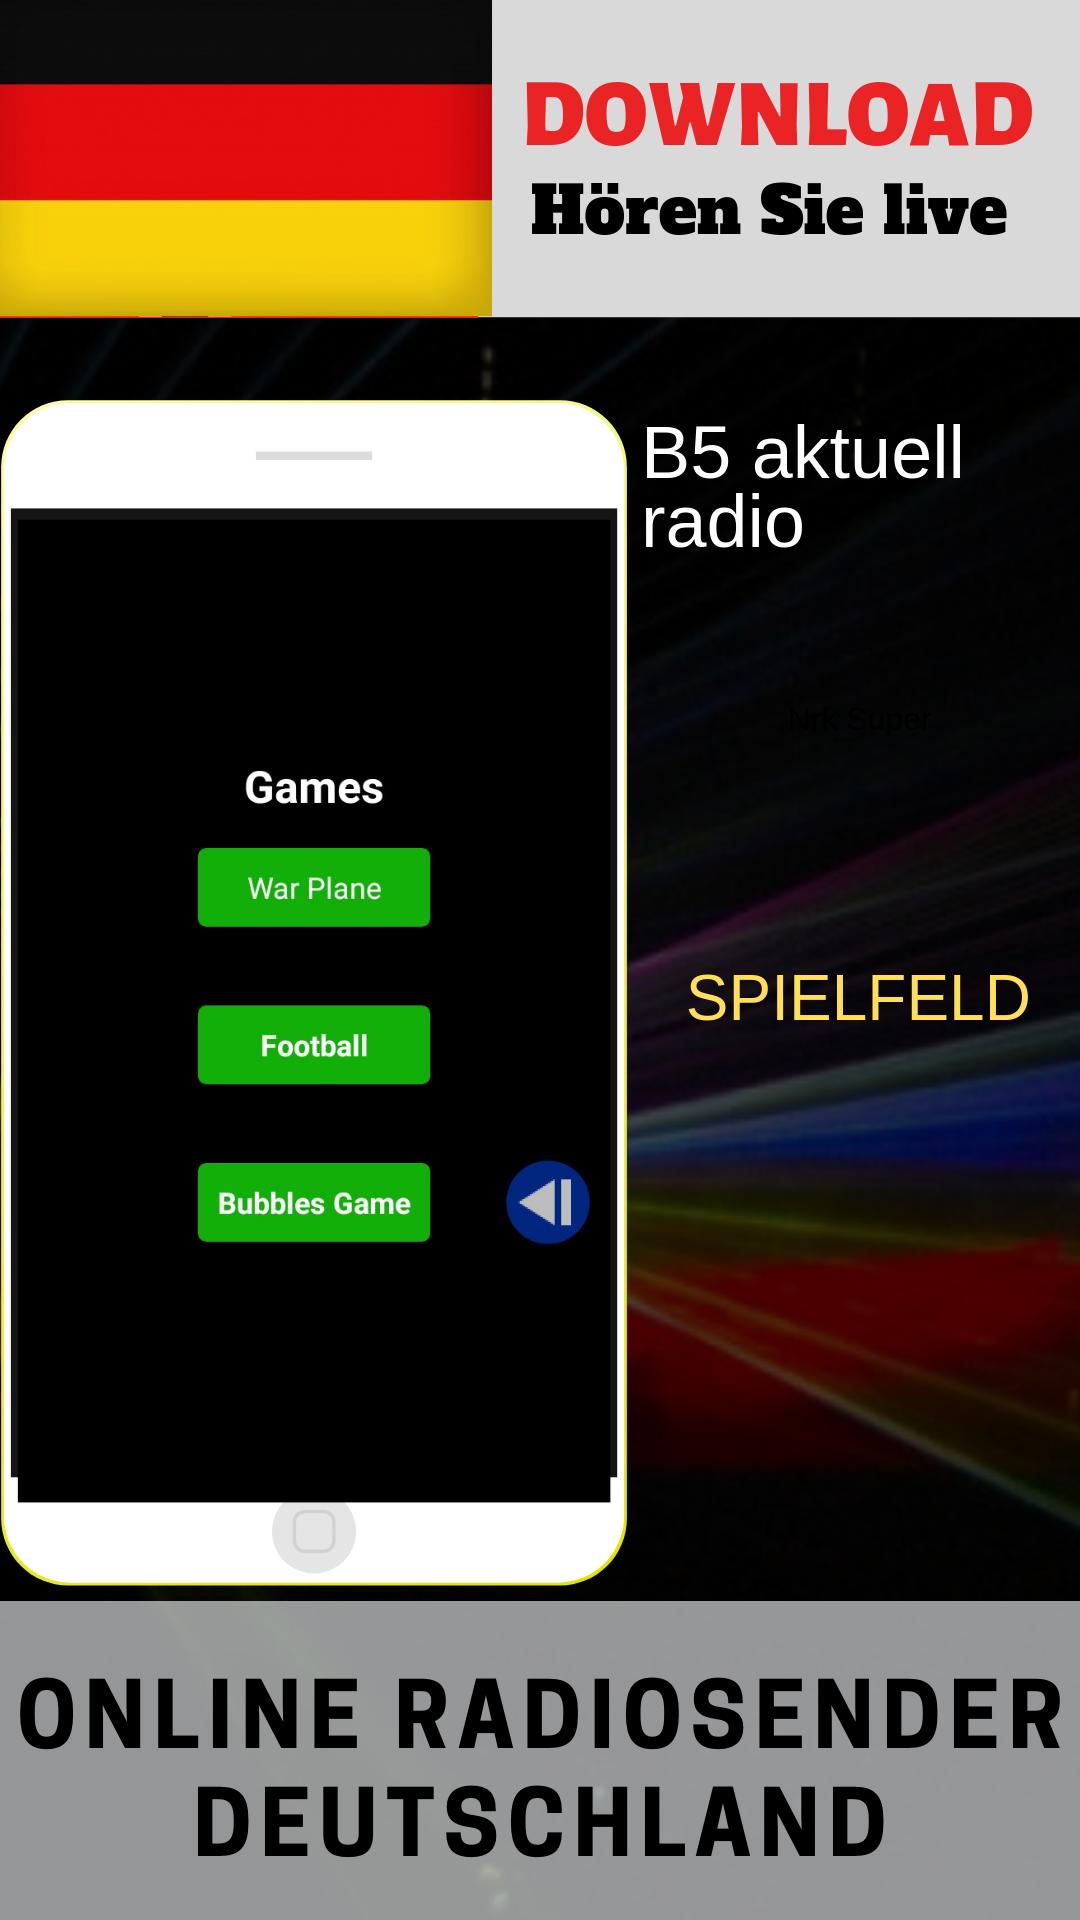 B5 aktuell radio for Android - APK Download